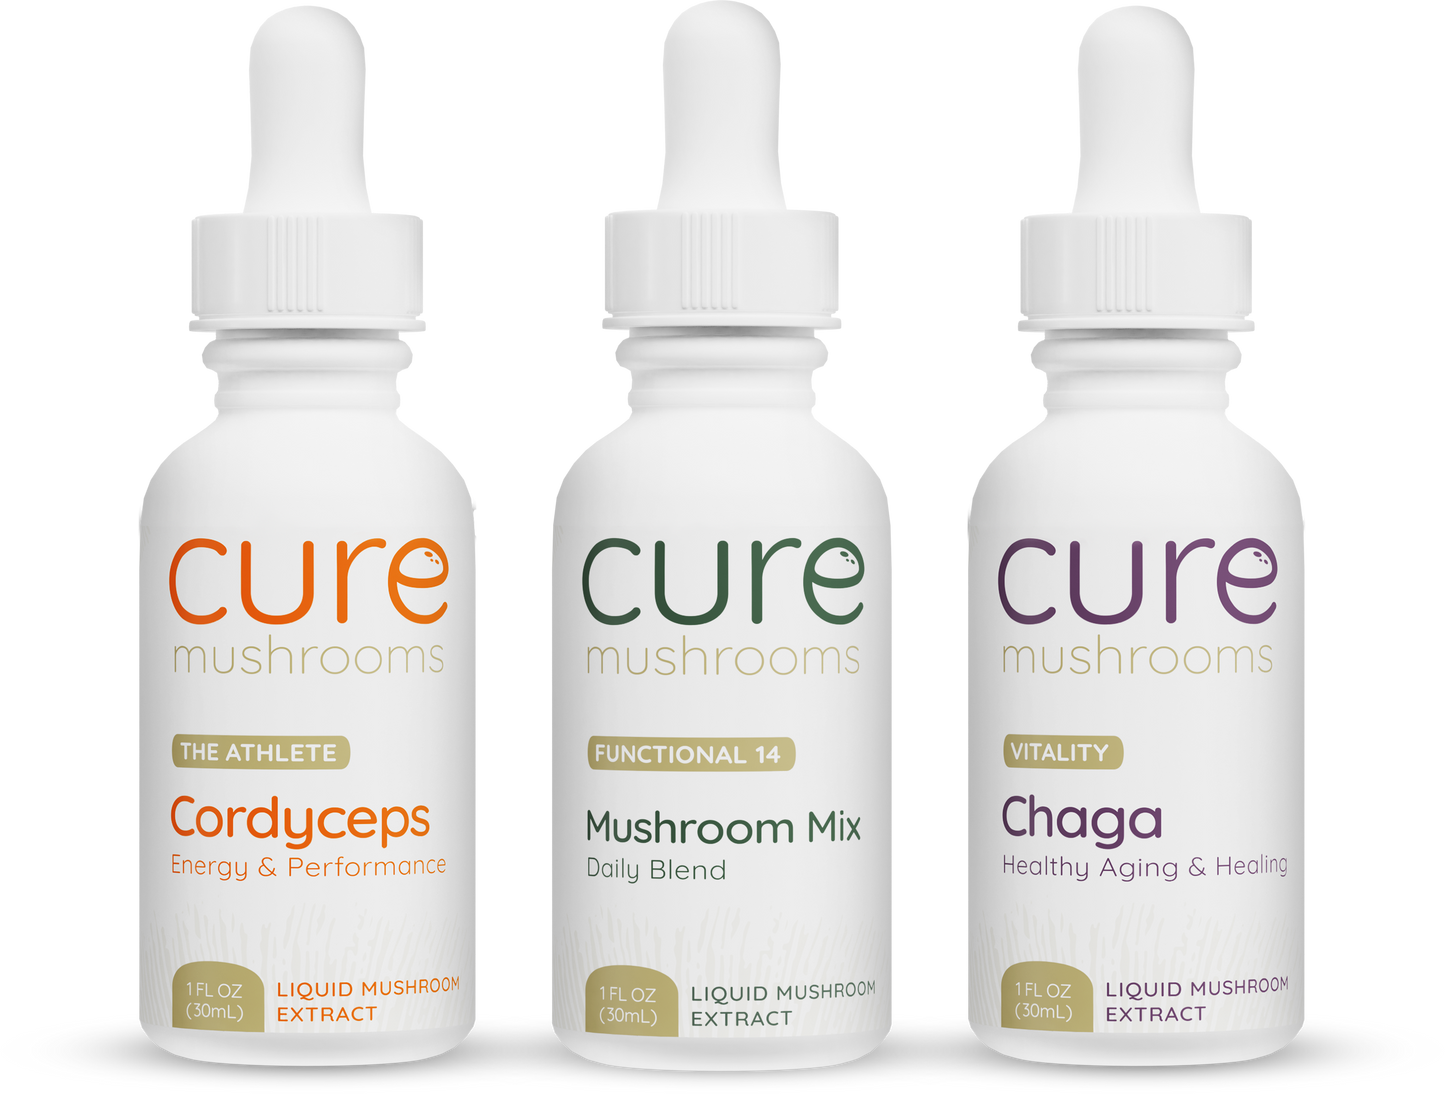 starter pack with cordyceps, mushroom mix, and chaga tinctures